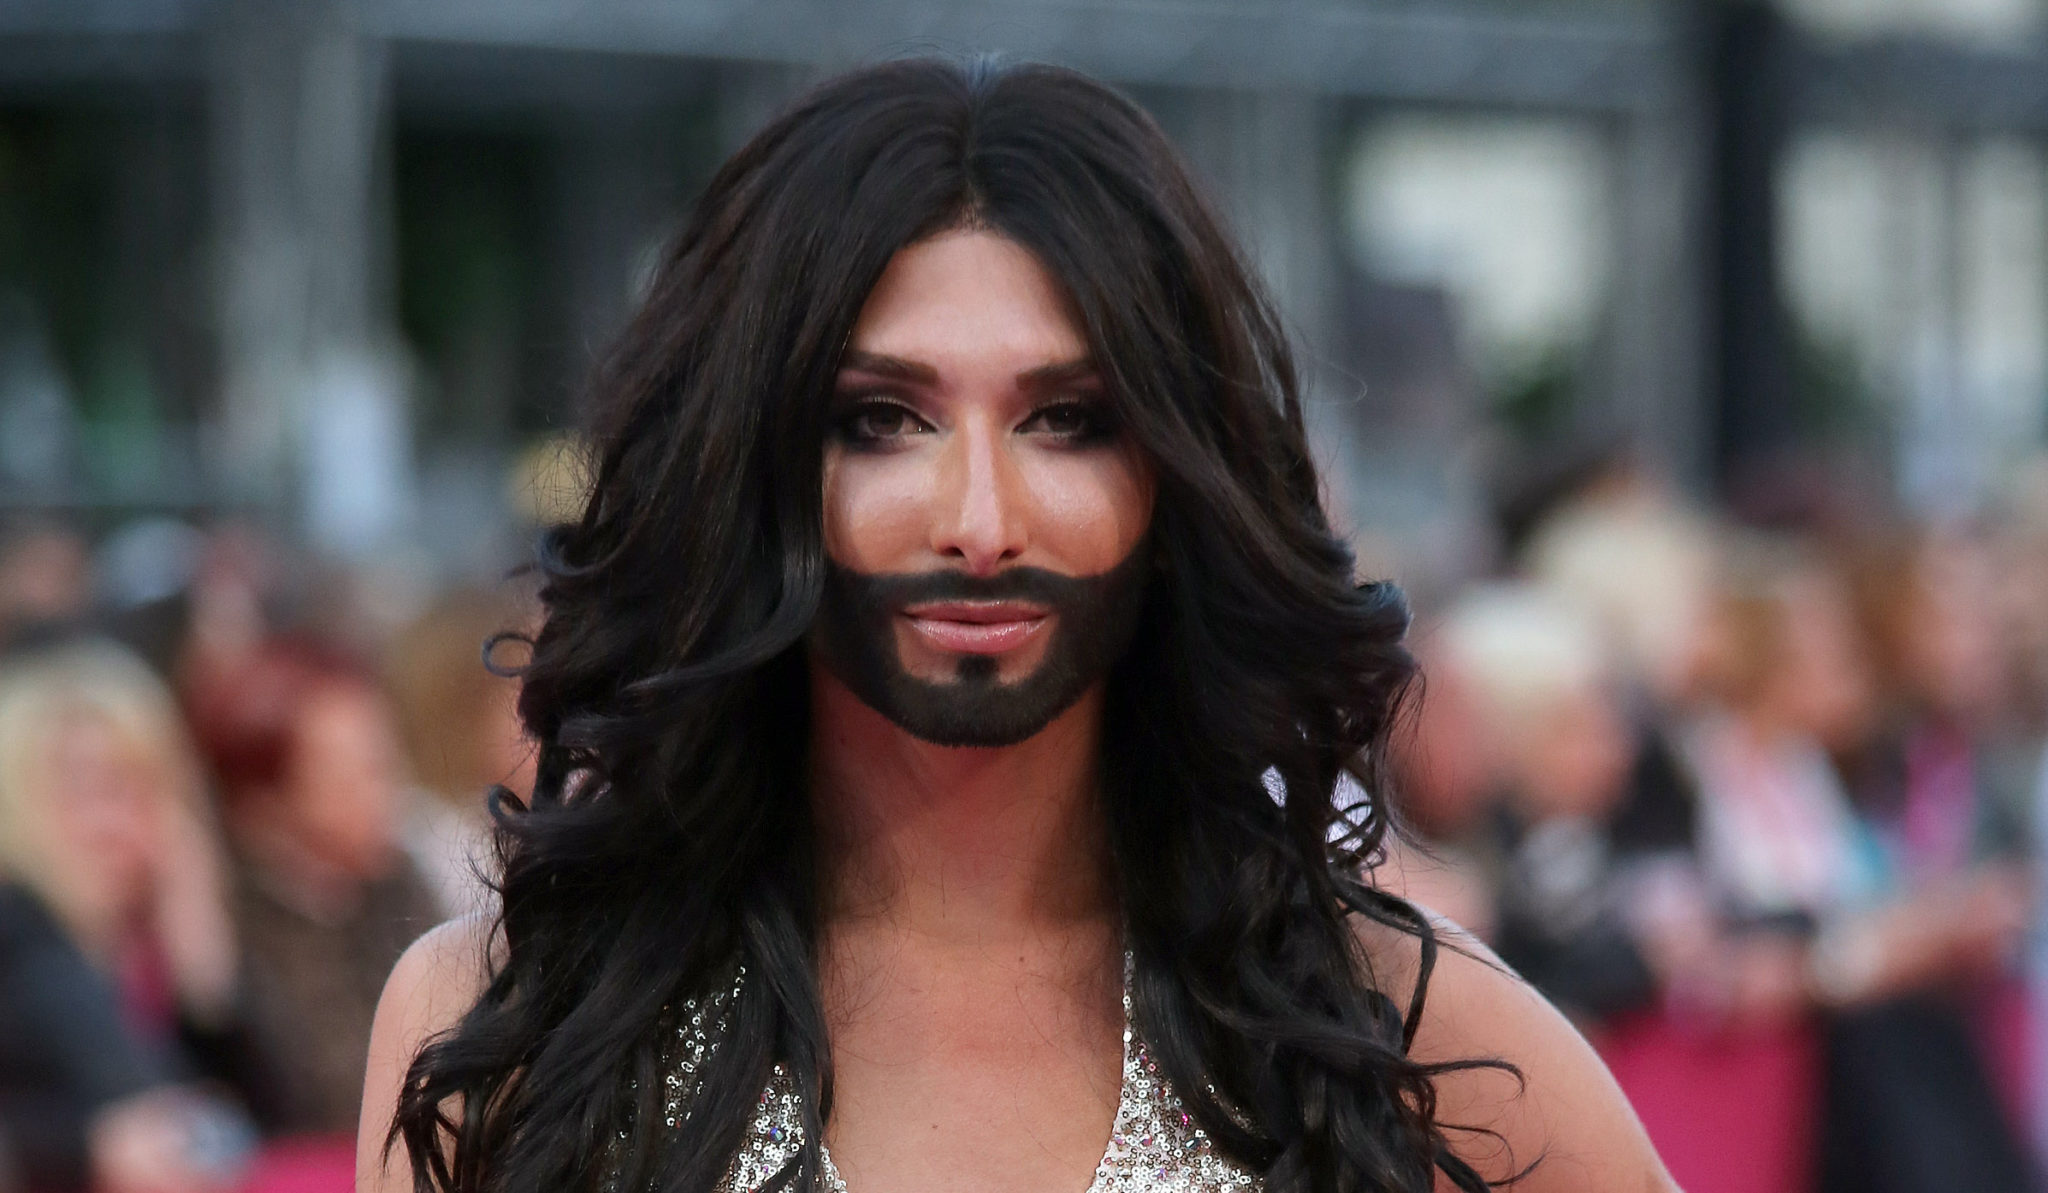 Austria: Plans to release Conchita’s entry on 18 March